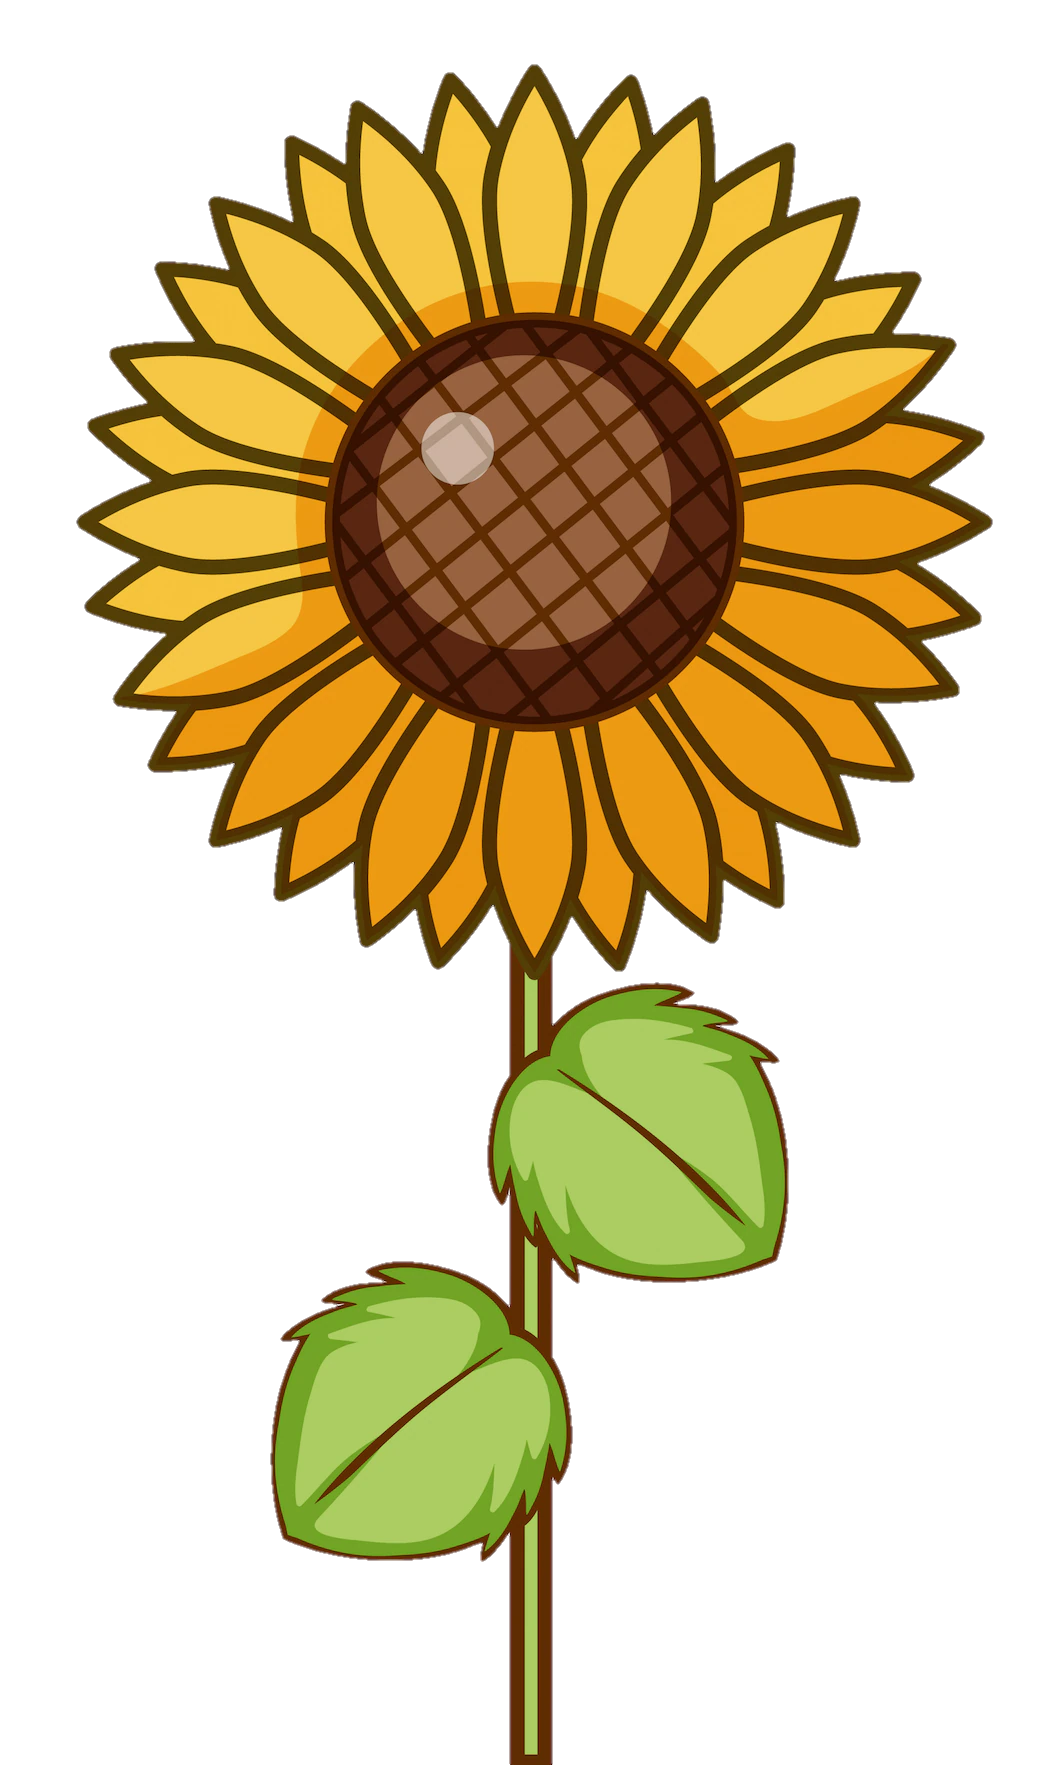 sunflower-png-image-from-pngfre-24